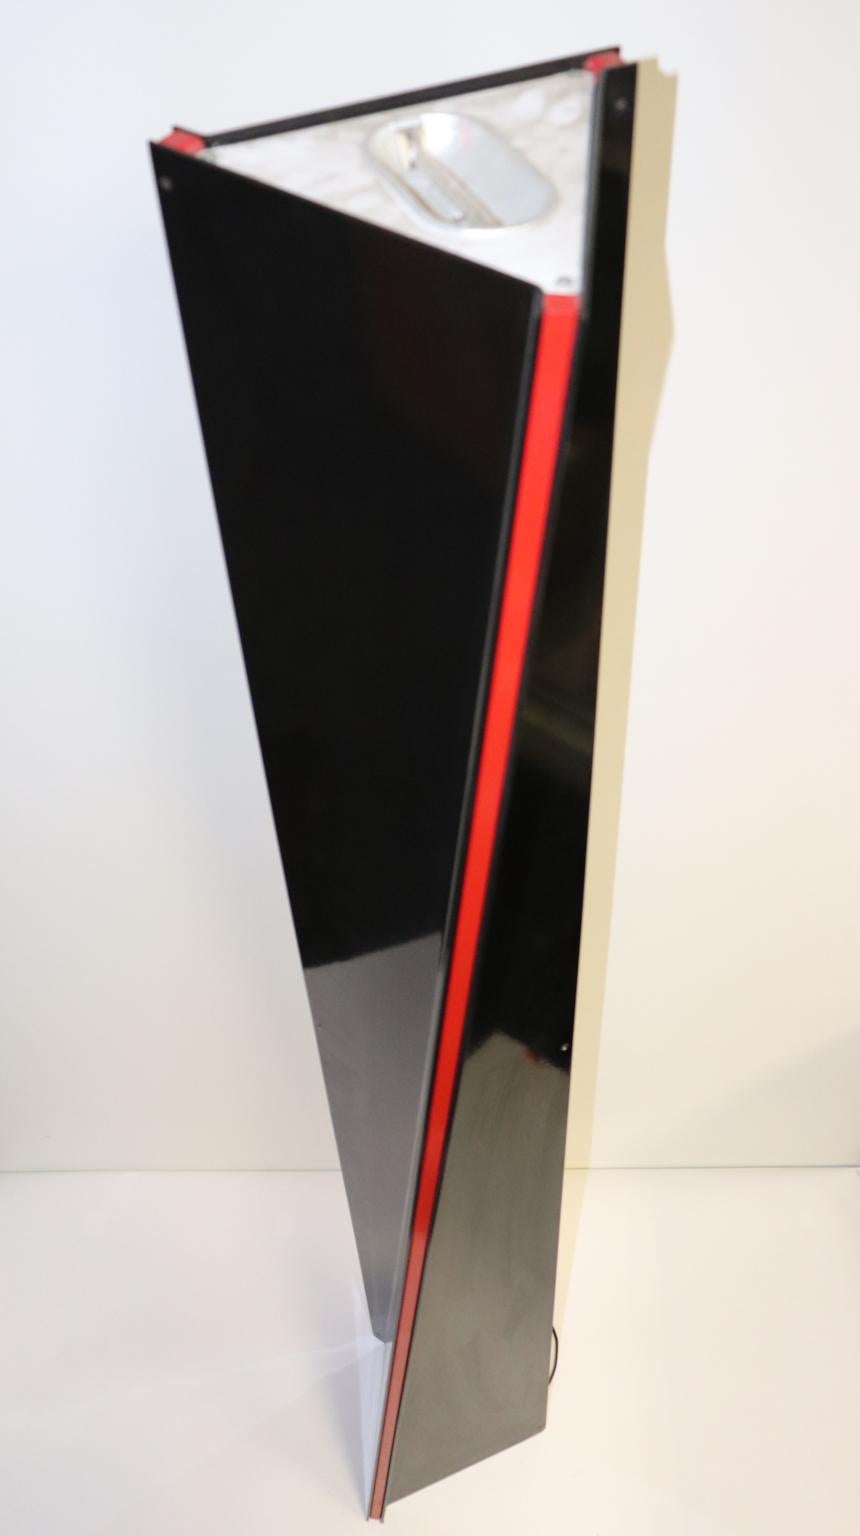 Mid-Century Modern Mauro Marzollo Sculptured Floor Lamp Black with Red Stripes Details For Sale